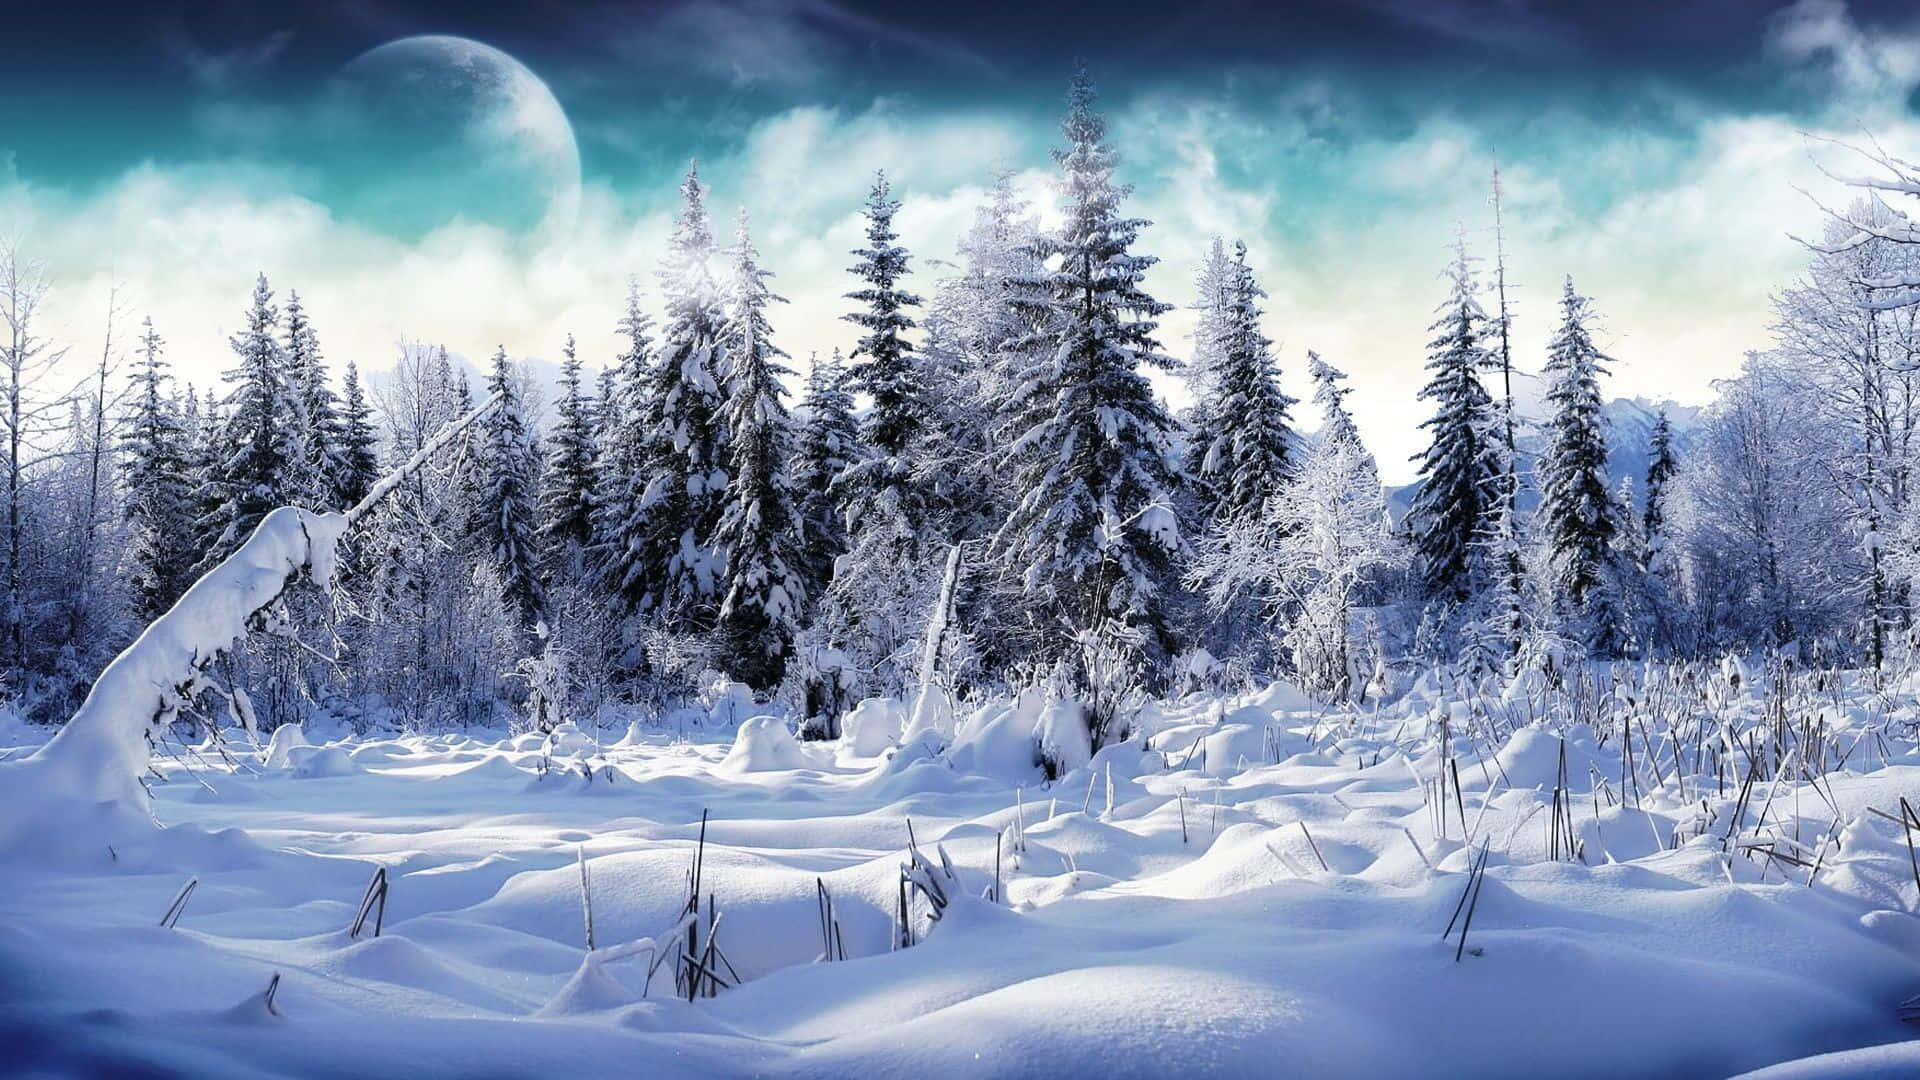 Stunning Winter Landscape with Forest and Snowy Mountains